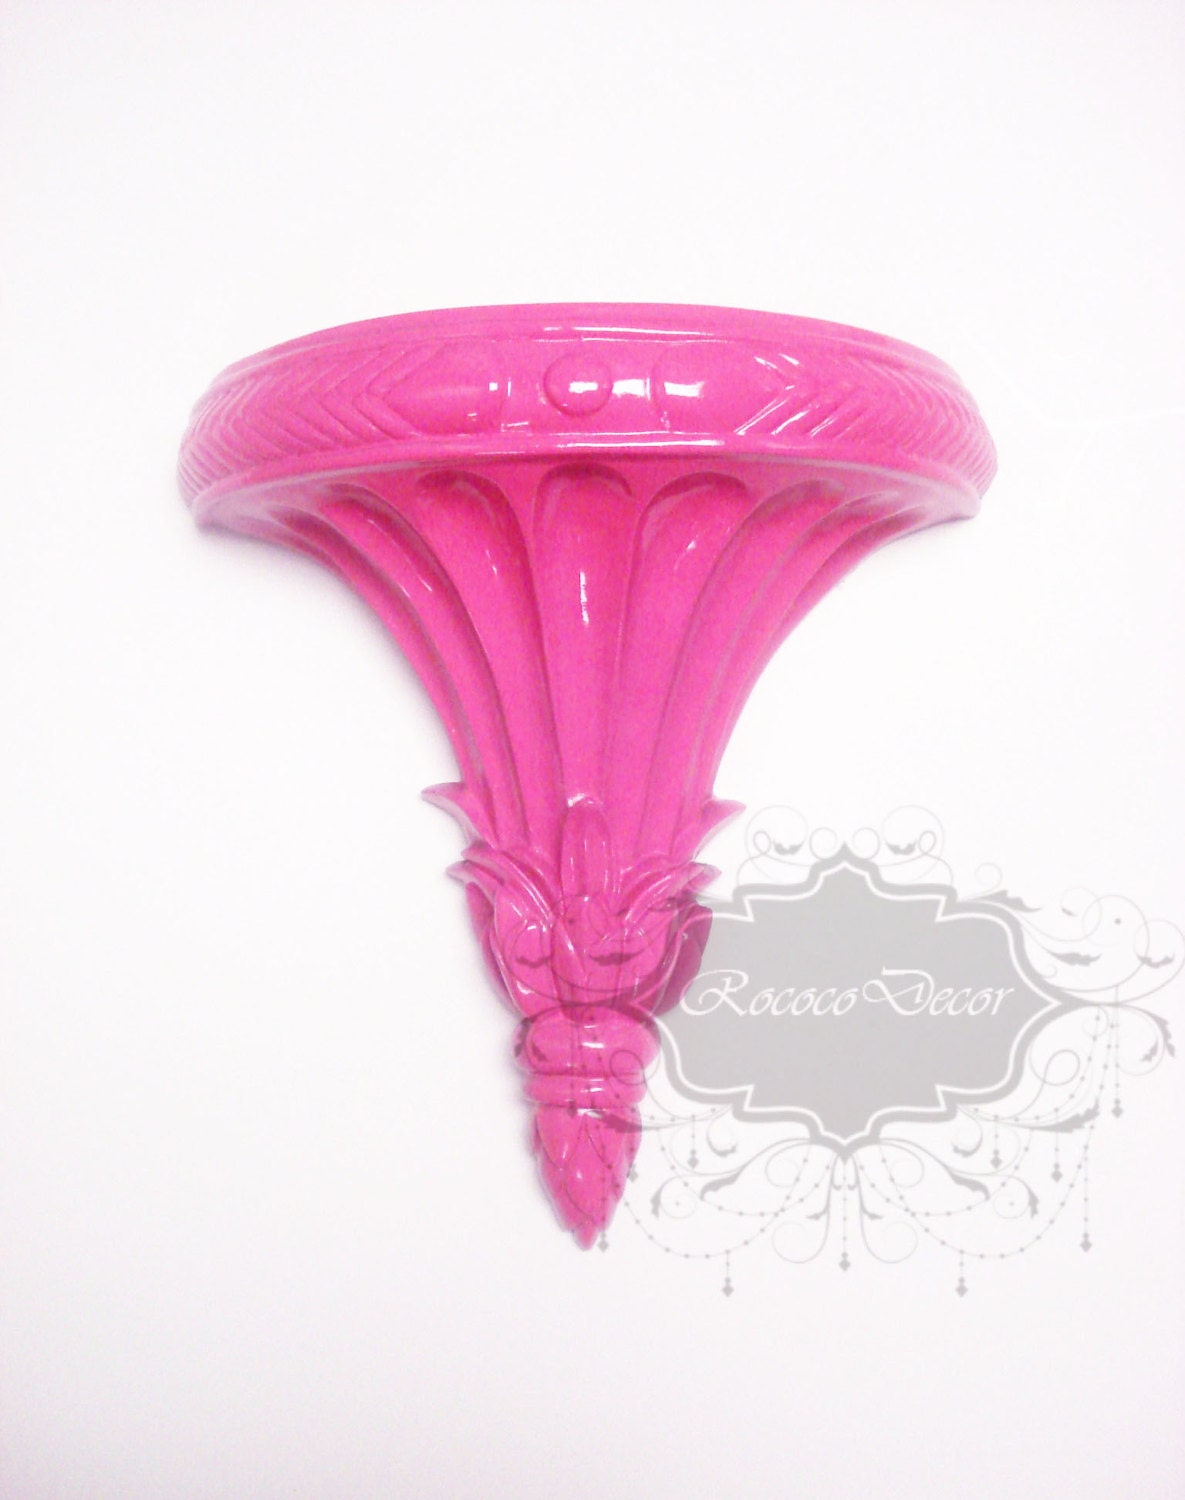 Popular items for pink wall sconces on Etsy